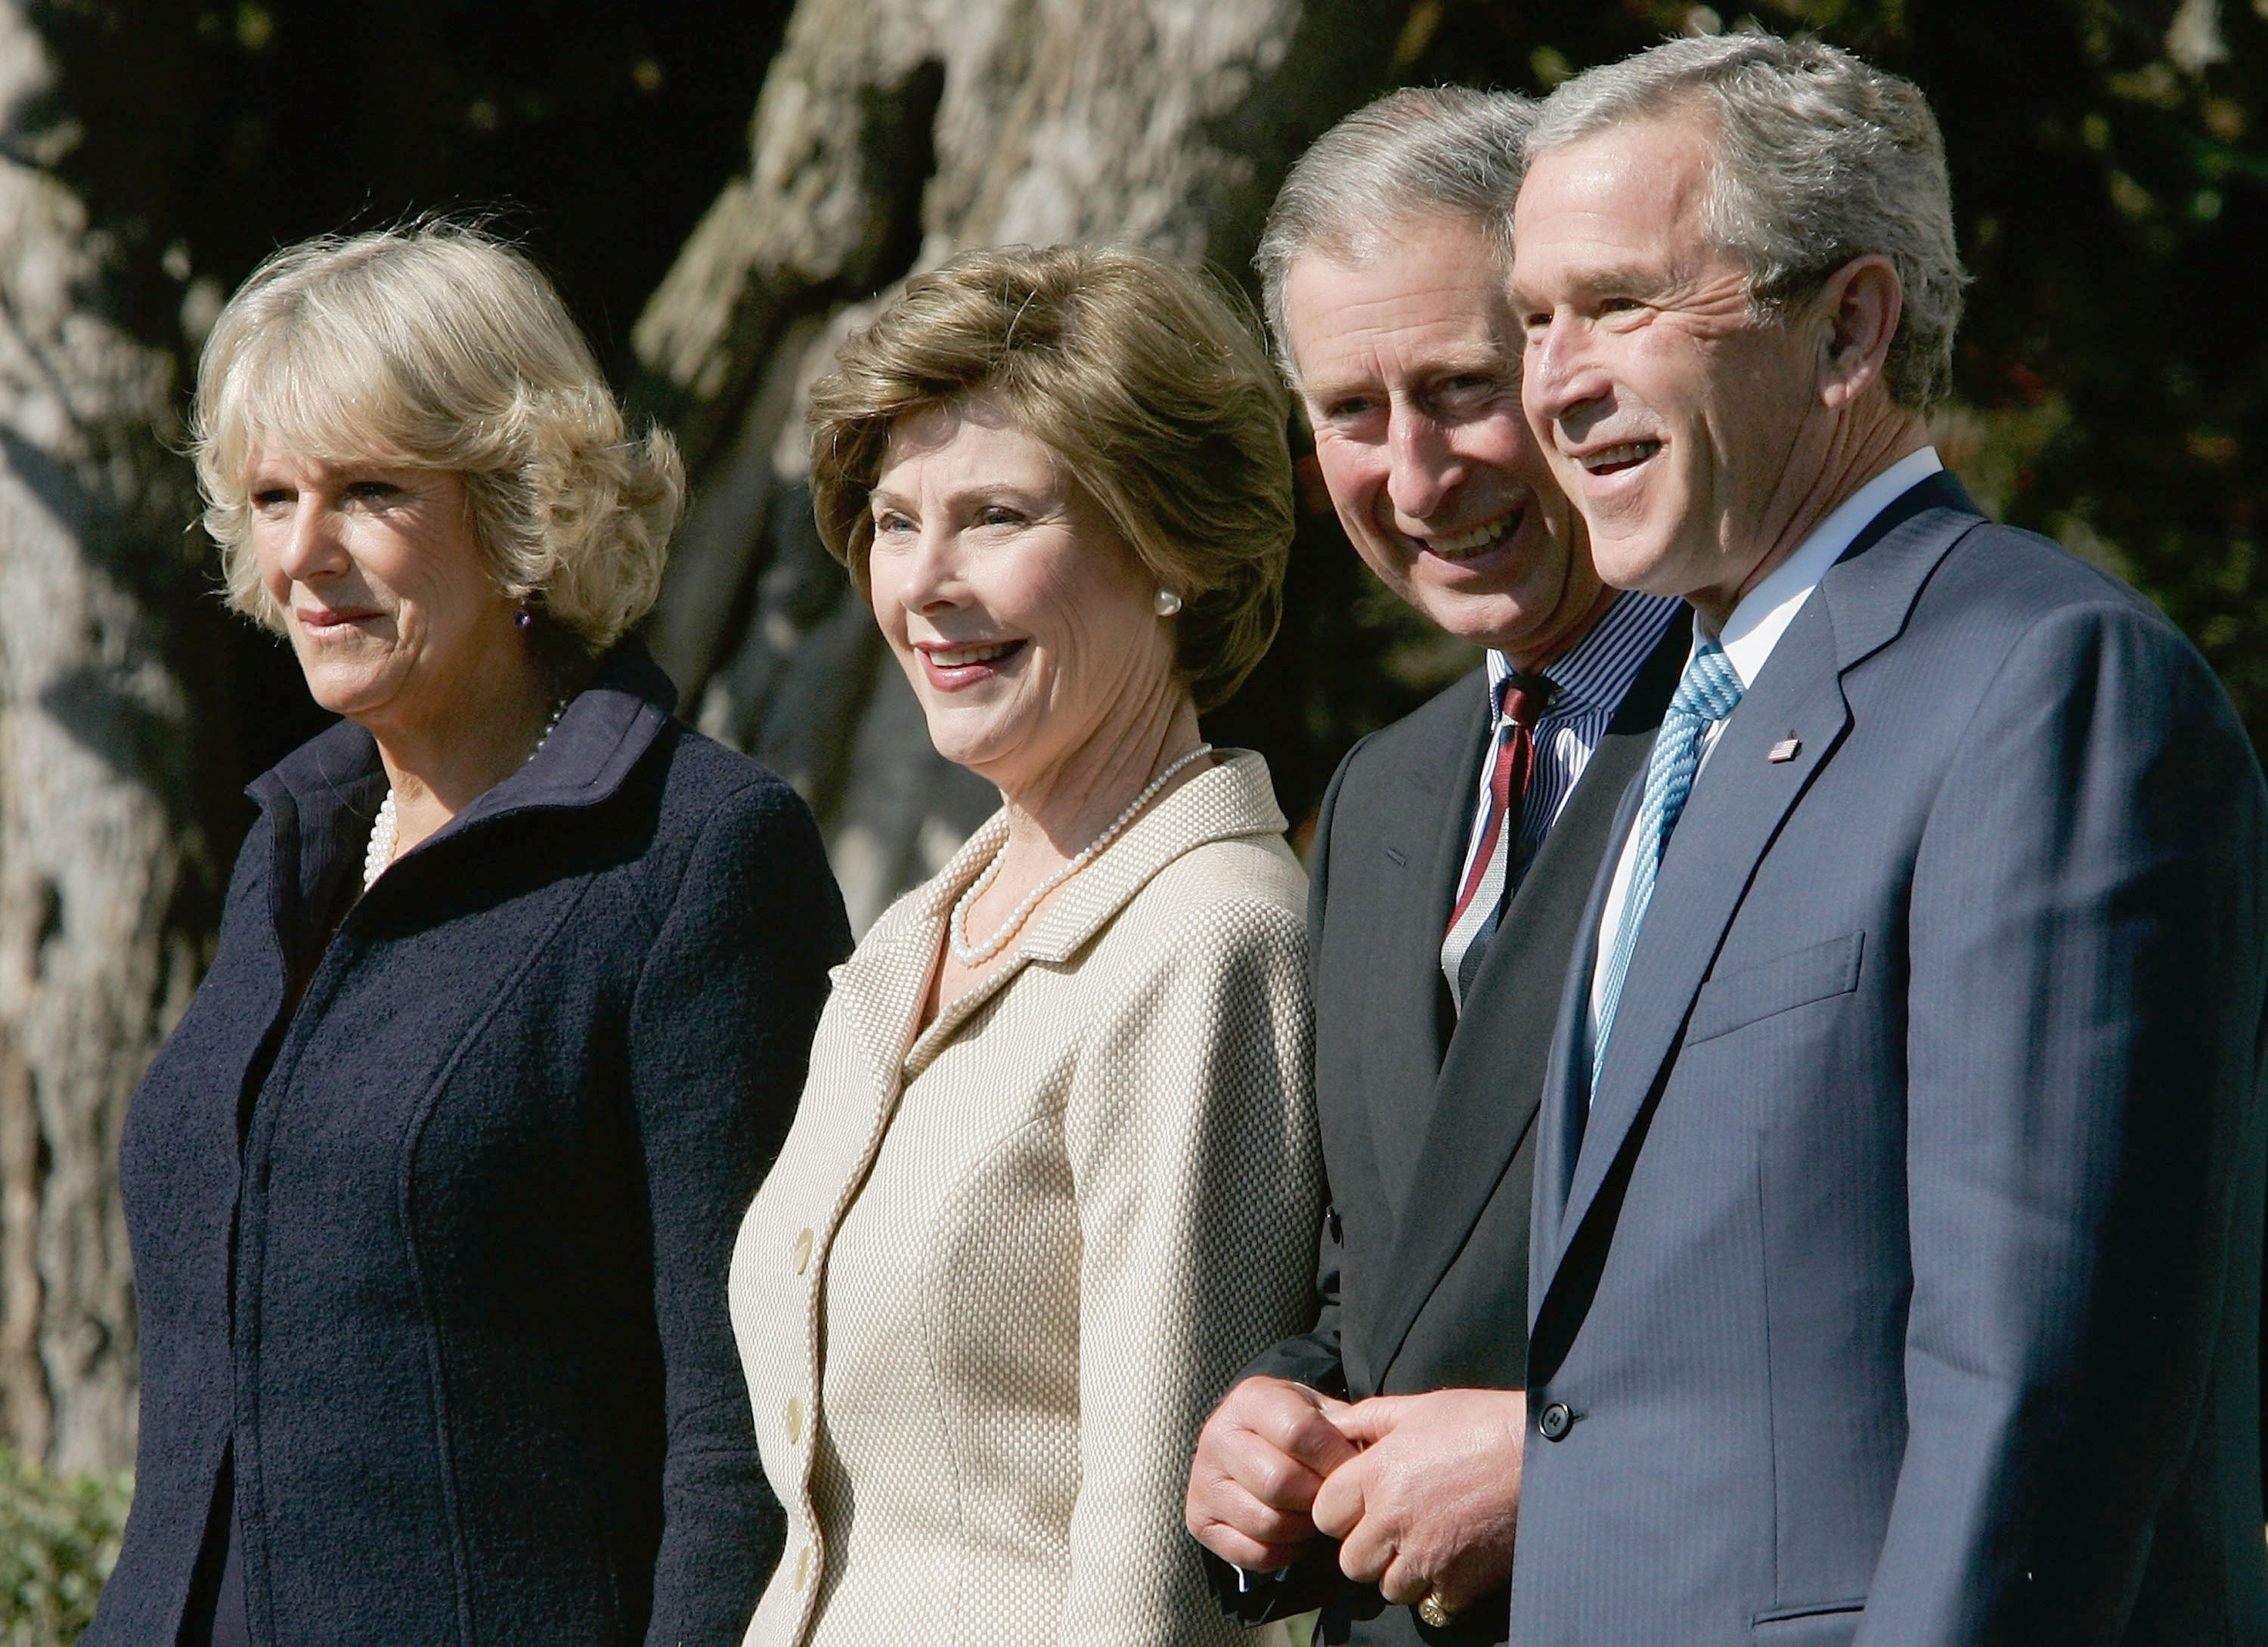 Charles and Camilla welcomed to the White House in 2005 by US President George W Bush and First Lady Laura Bush